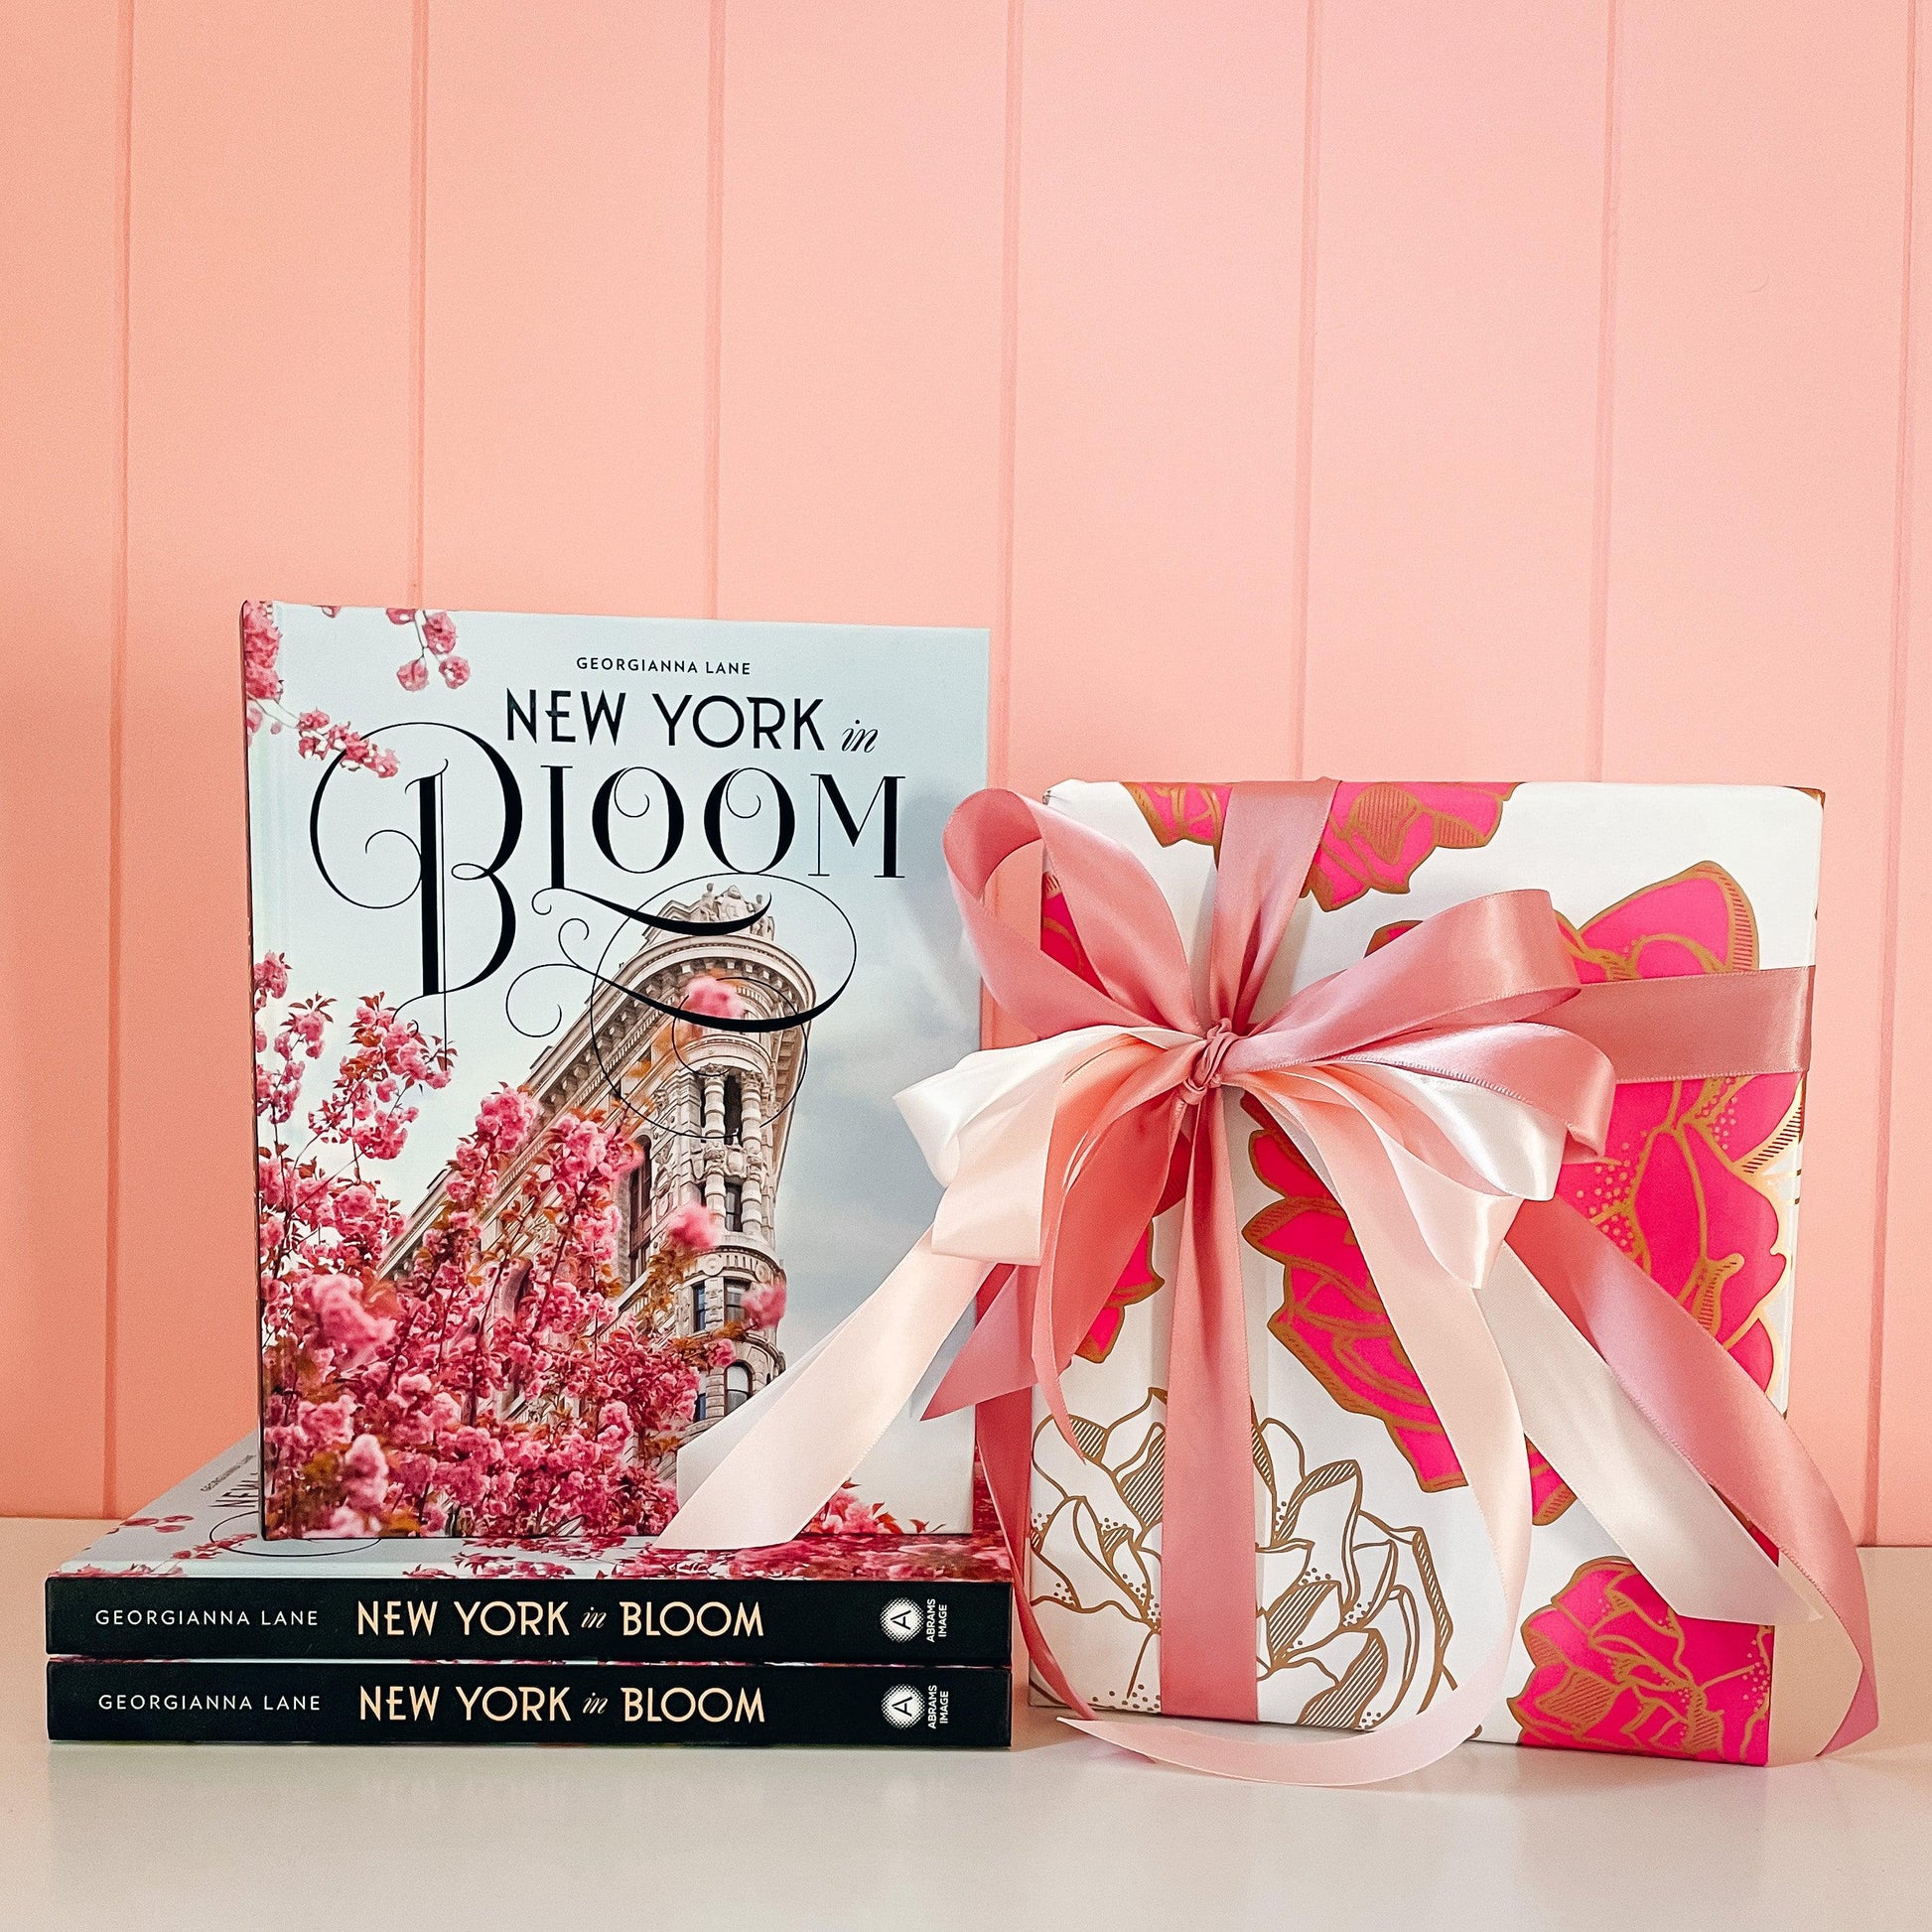 NEW YORK IN BLOOM - Coffee Table Book